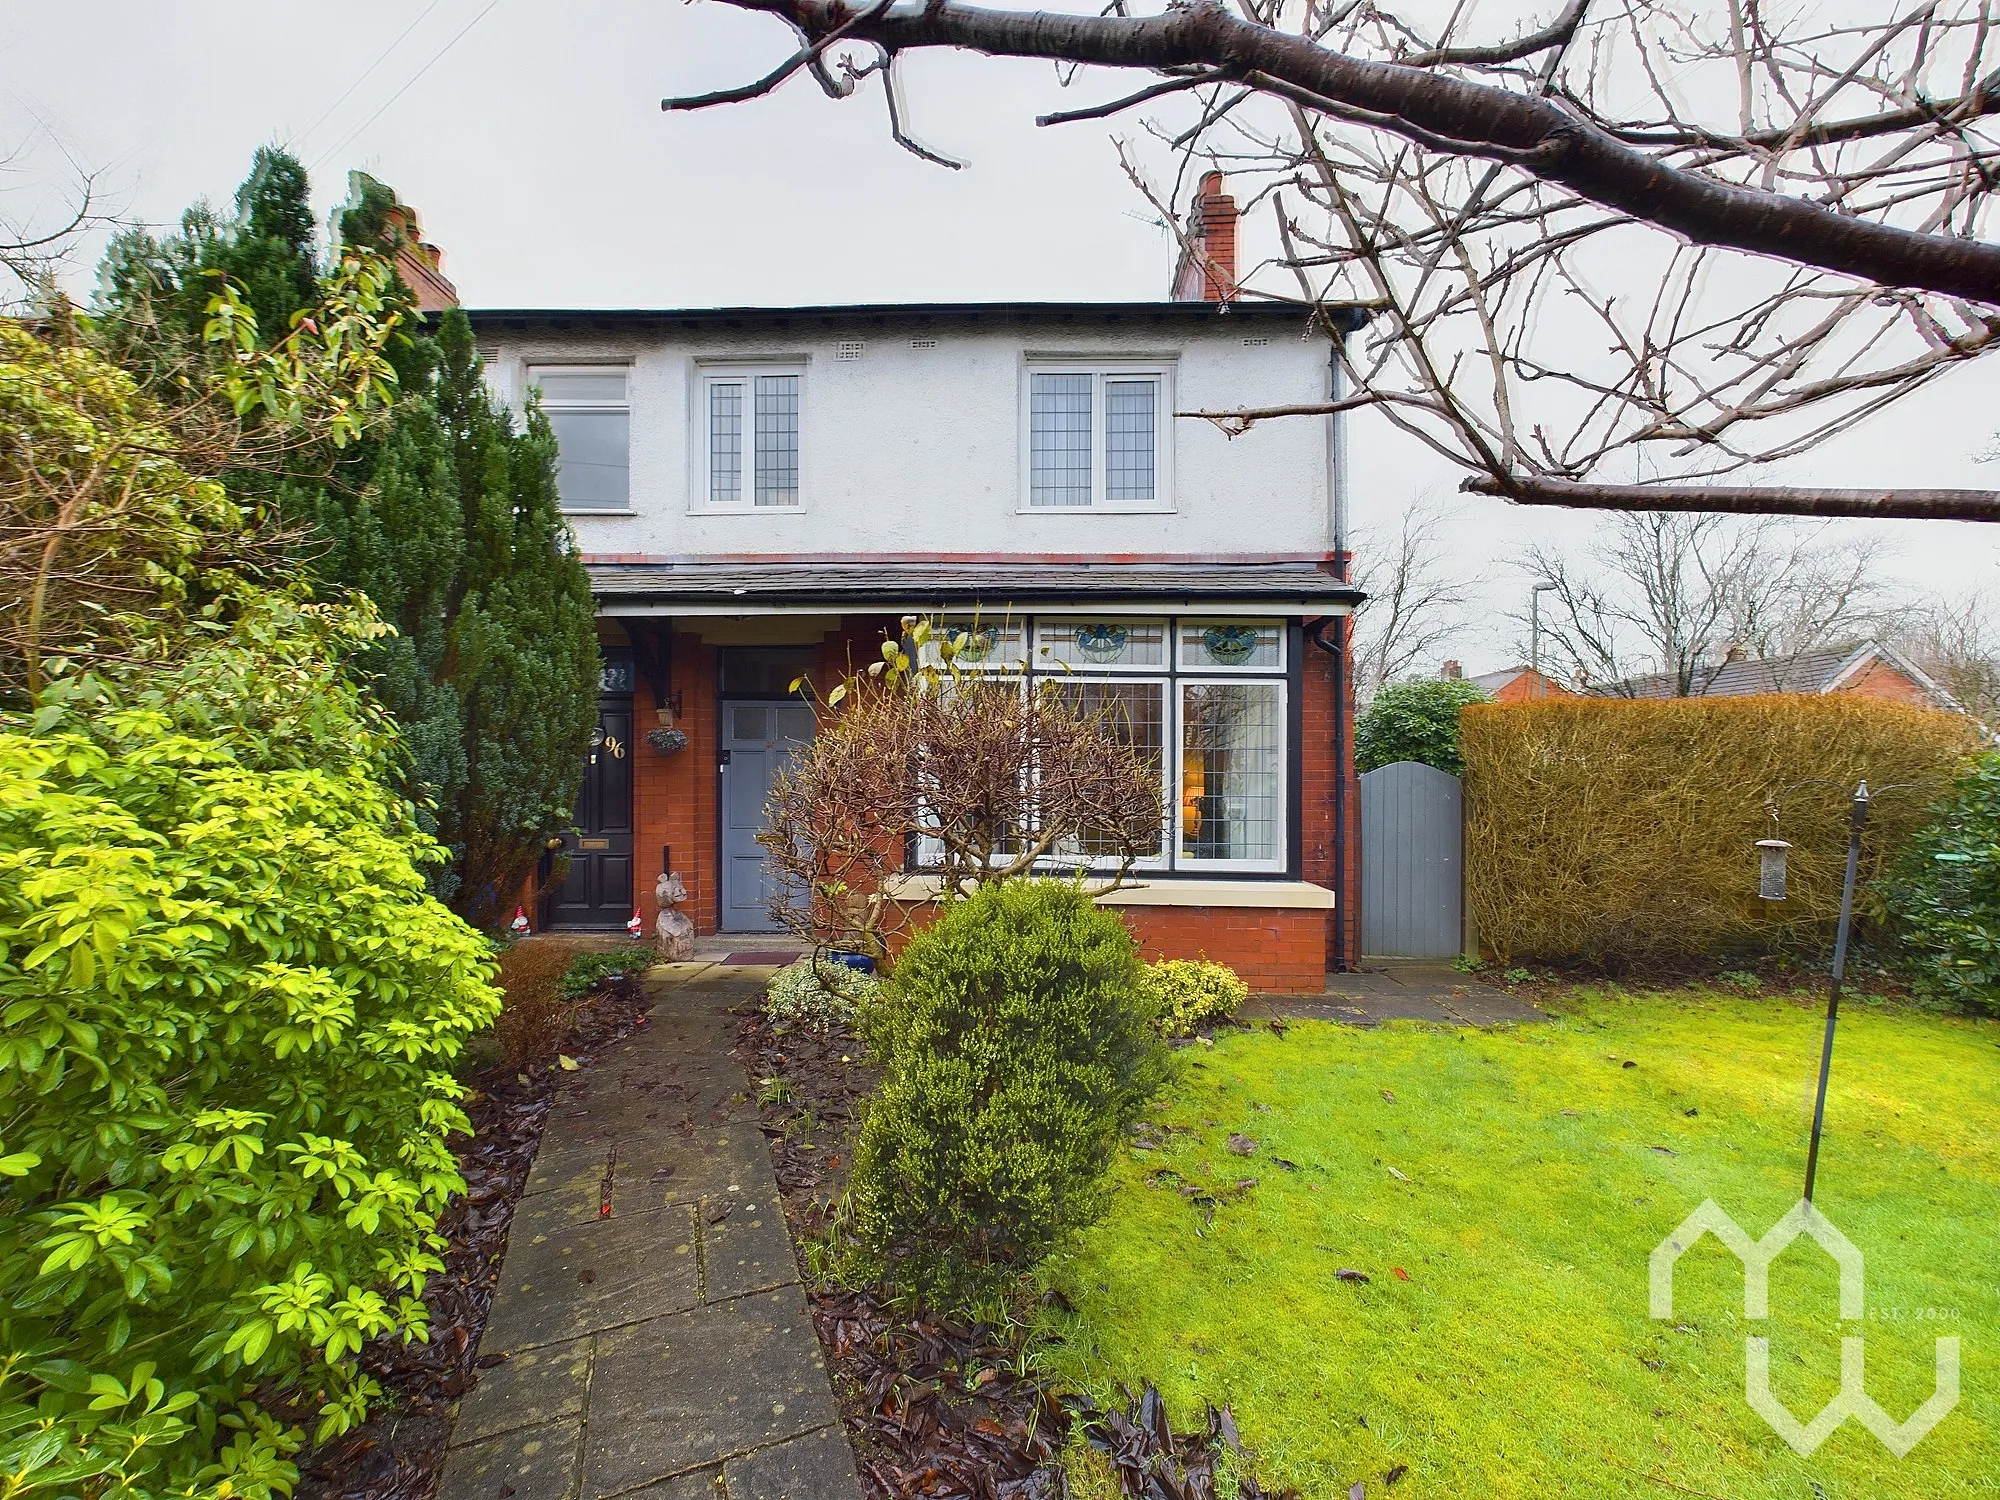 4 bed semi-detached house for sale in Cop Lane, Preston - Property Image 1